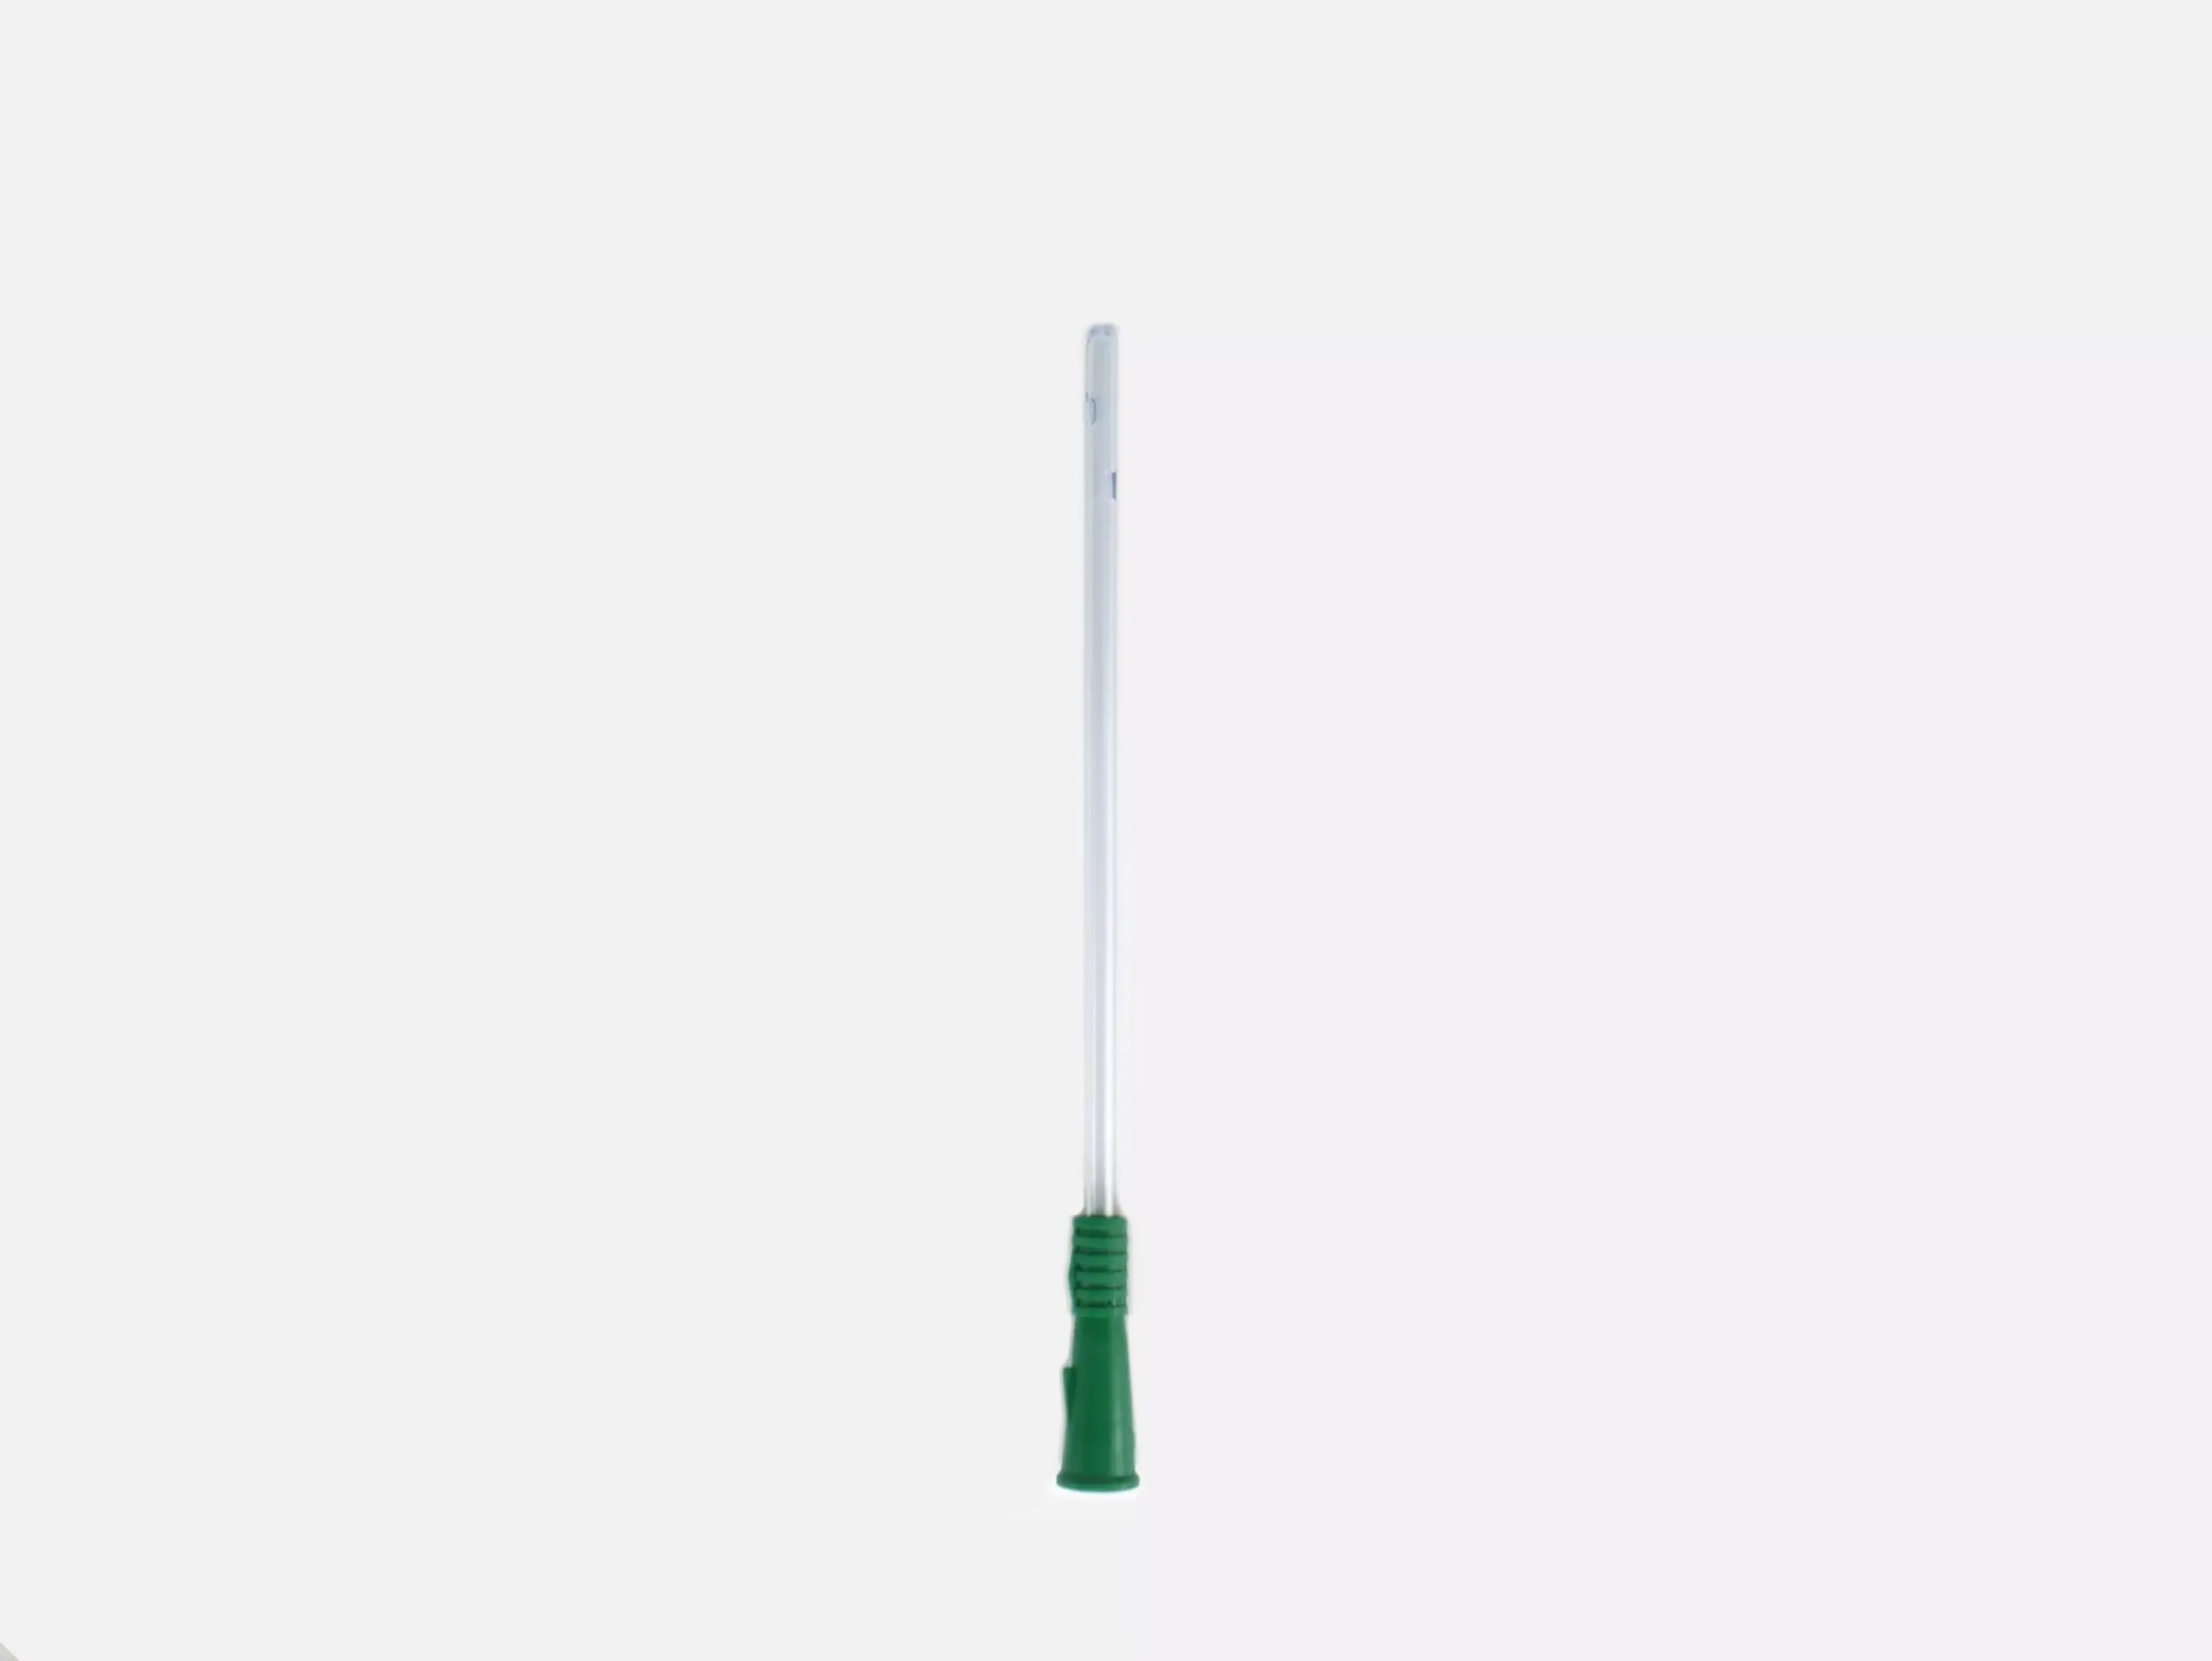 In-depth photograph providing a detailed view of the base of a RA Fischer Co. Cure brand catheter with a green grip.